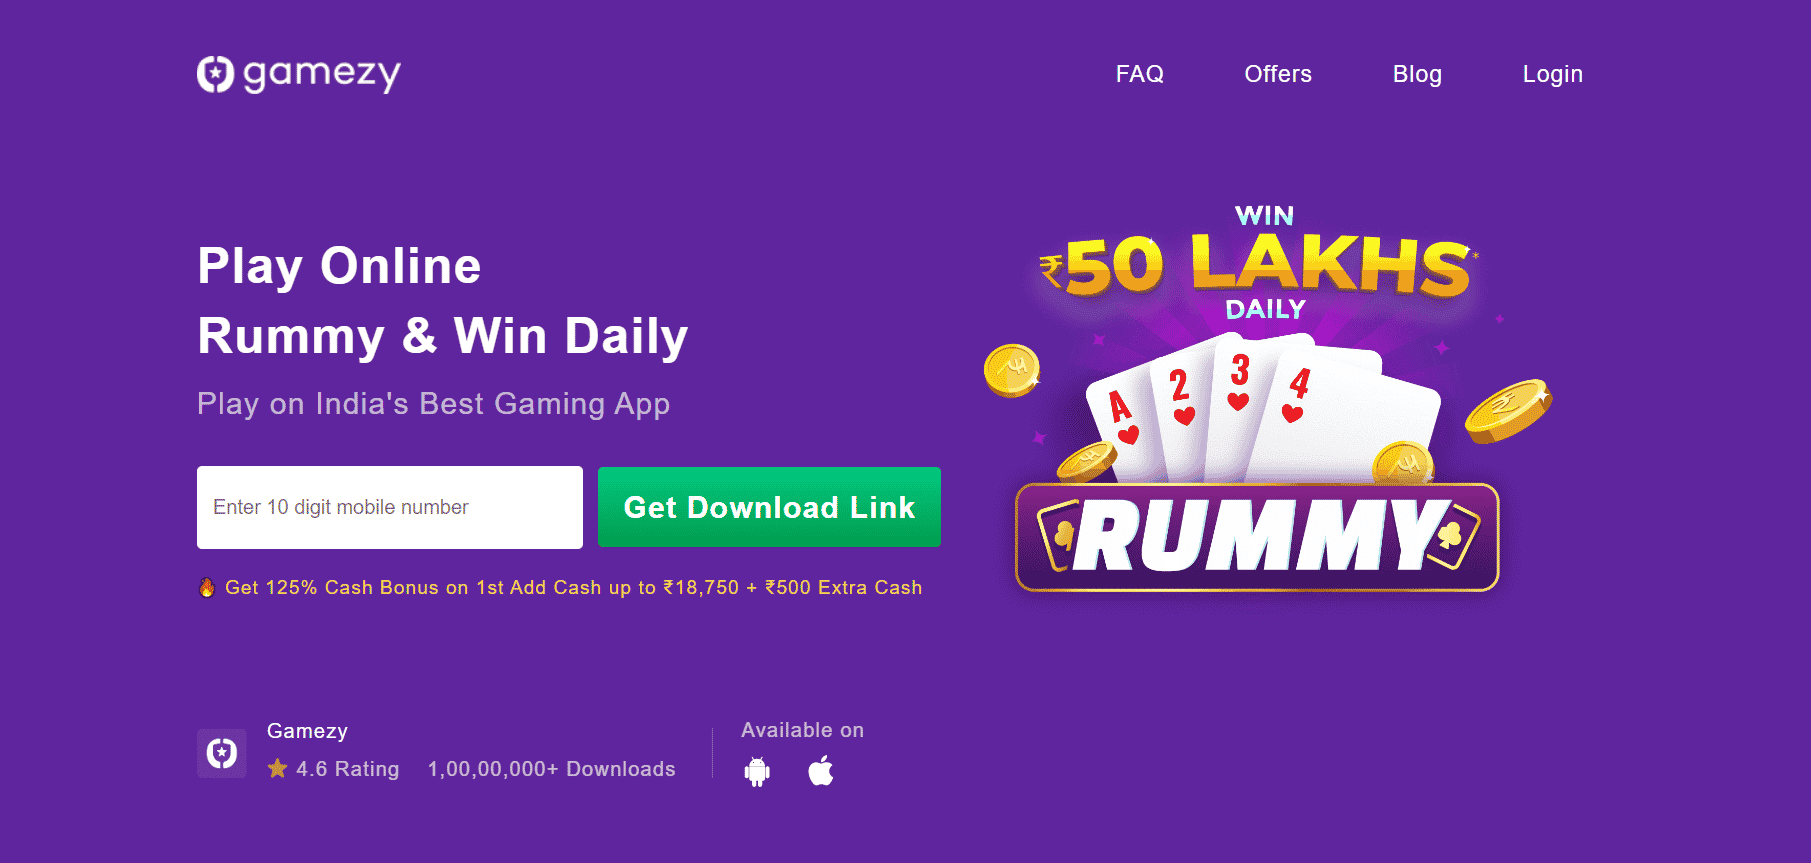 Gamezy Rummy homepage